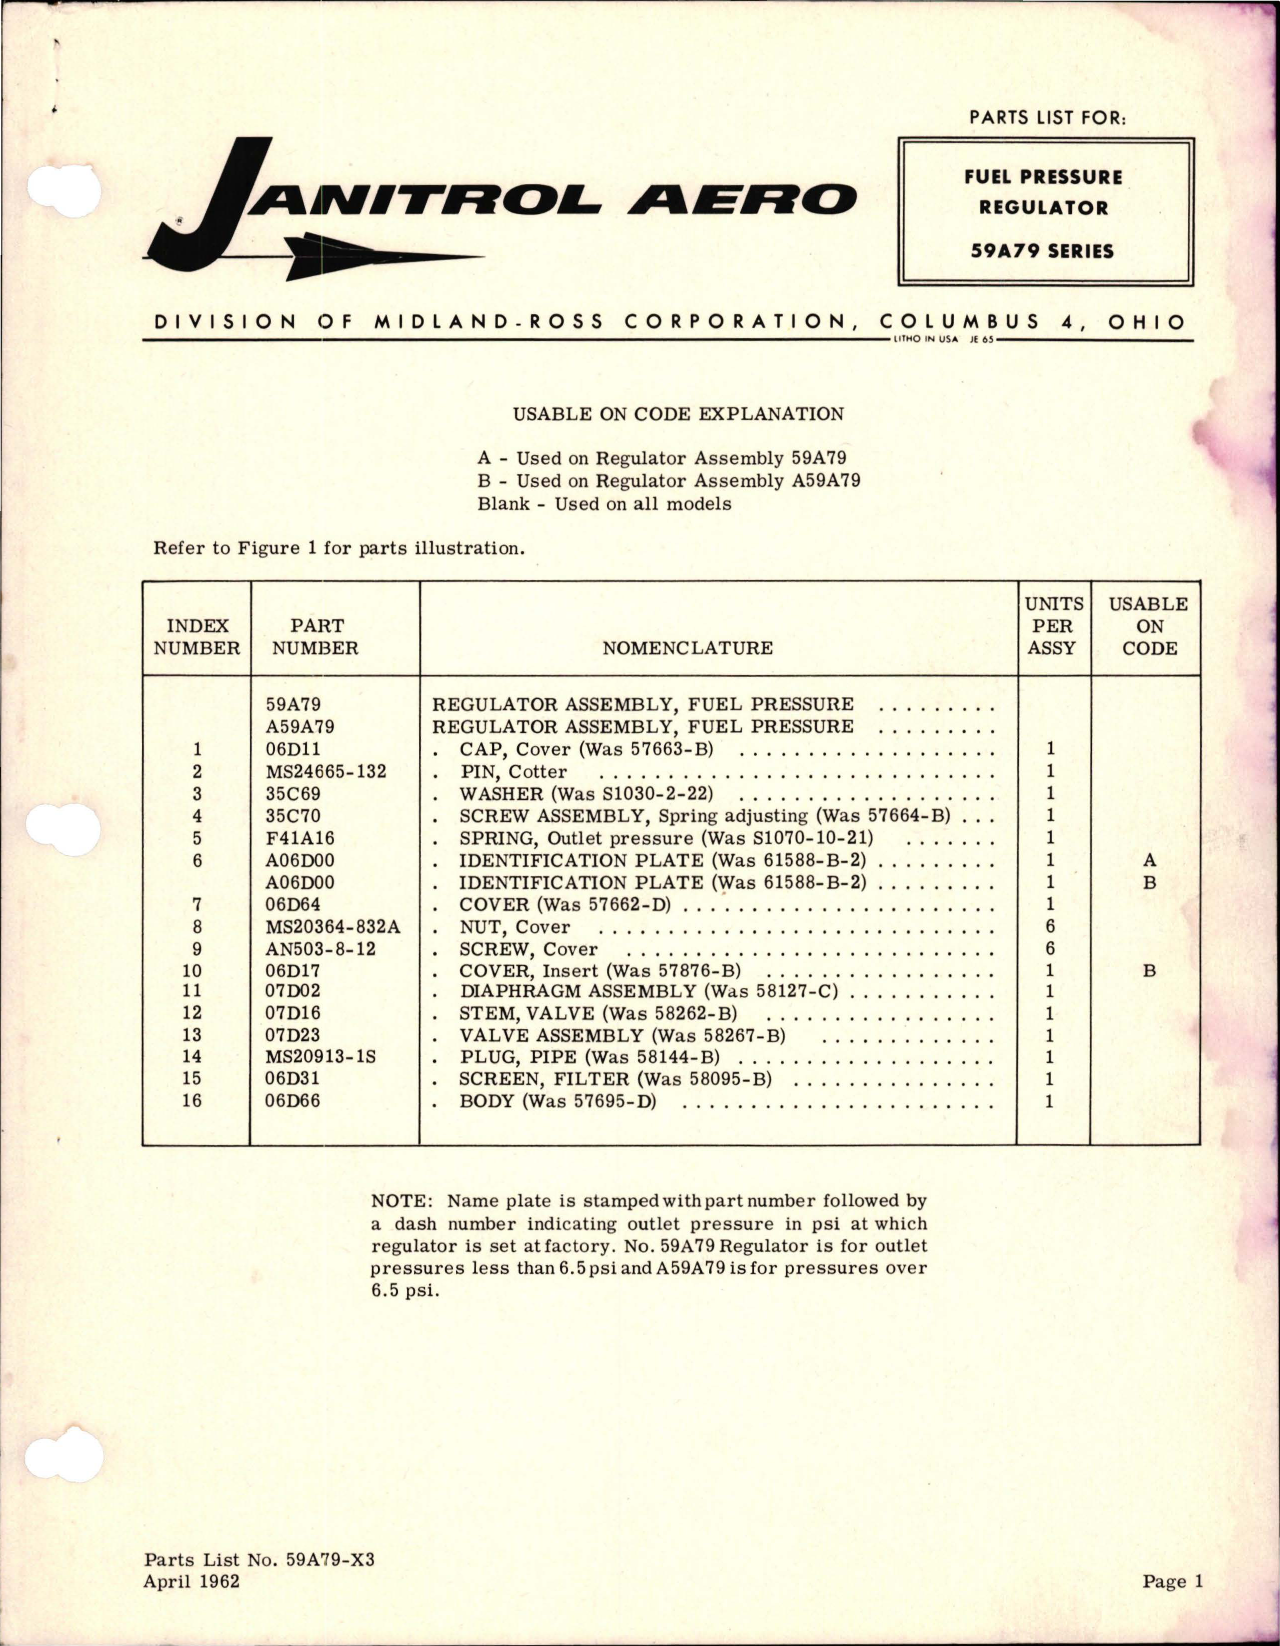 Sample page 1 from AirCorps Library document: Parts List for Fuel Pressure Regulator - 59A79 Series